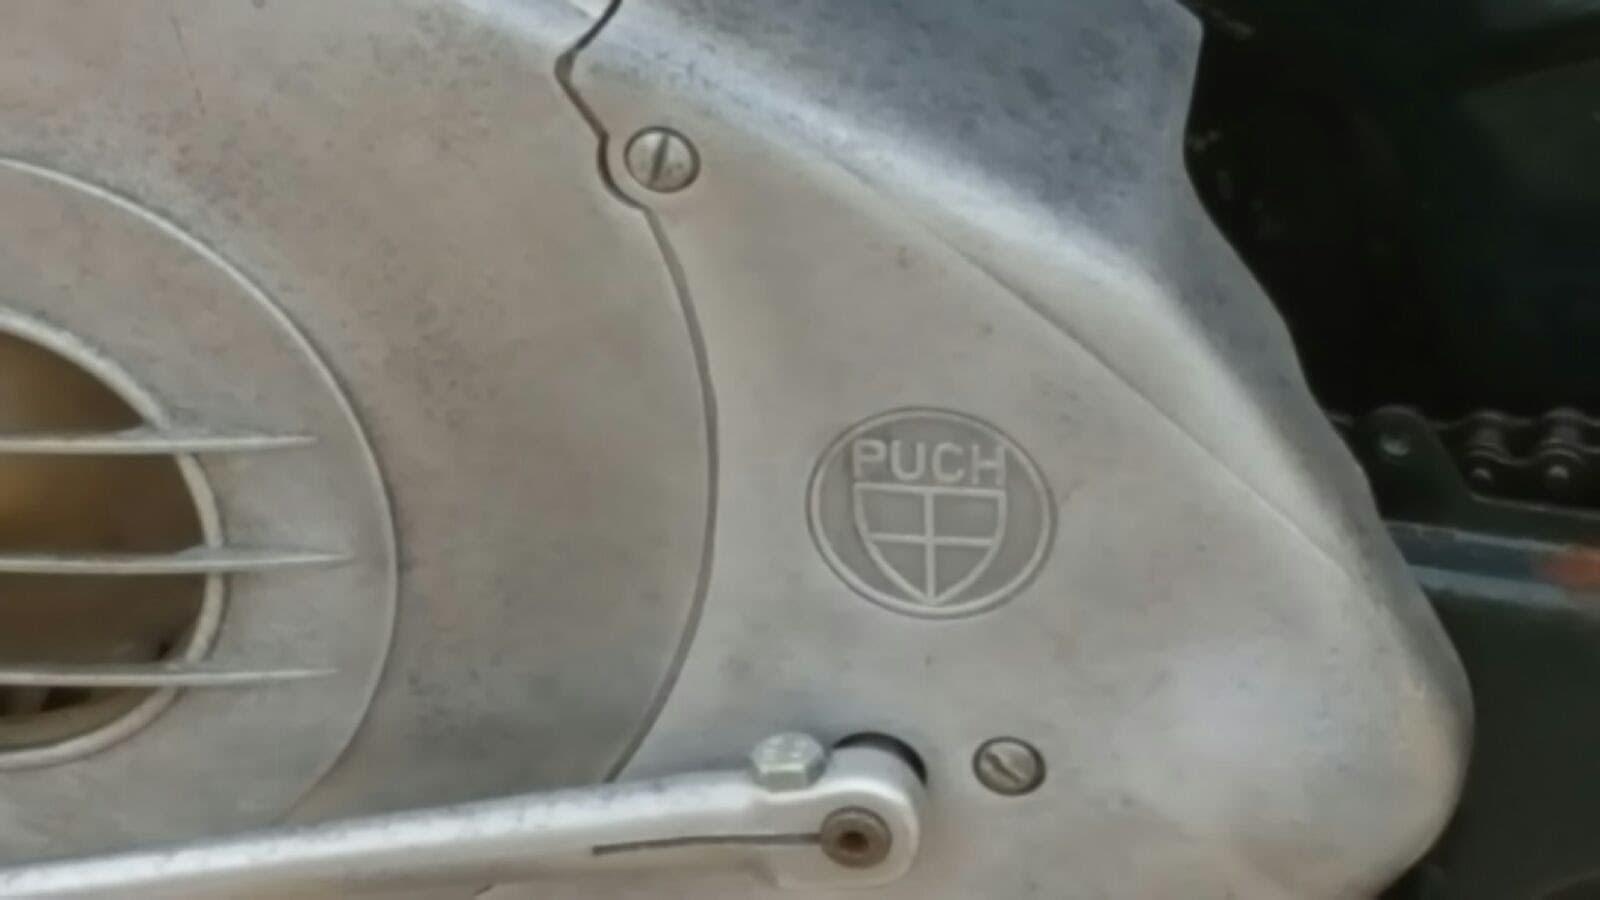 Puch plate 331.1.10.064.1